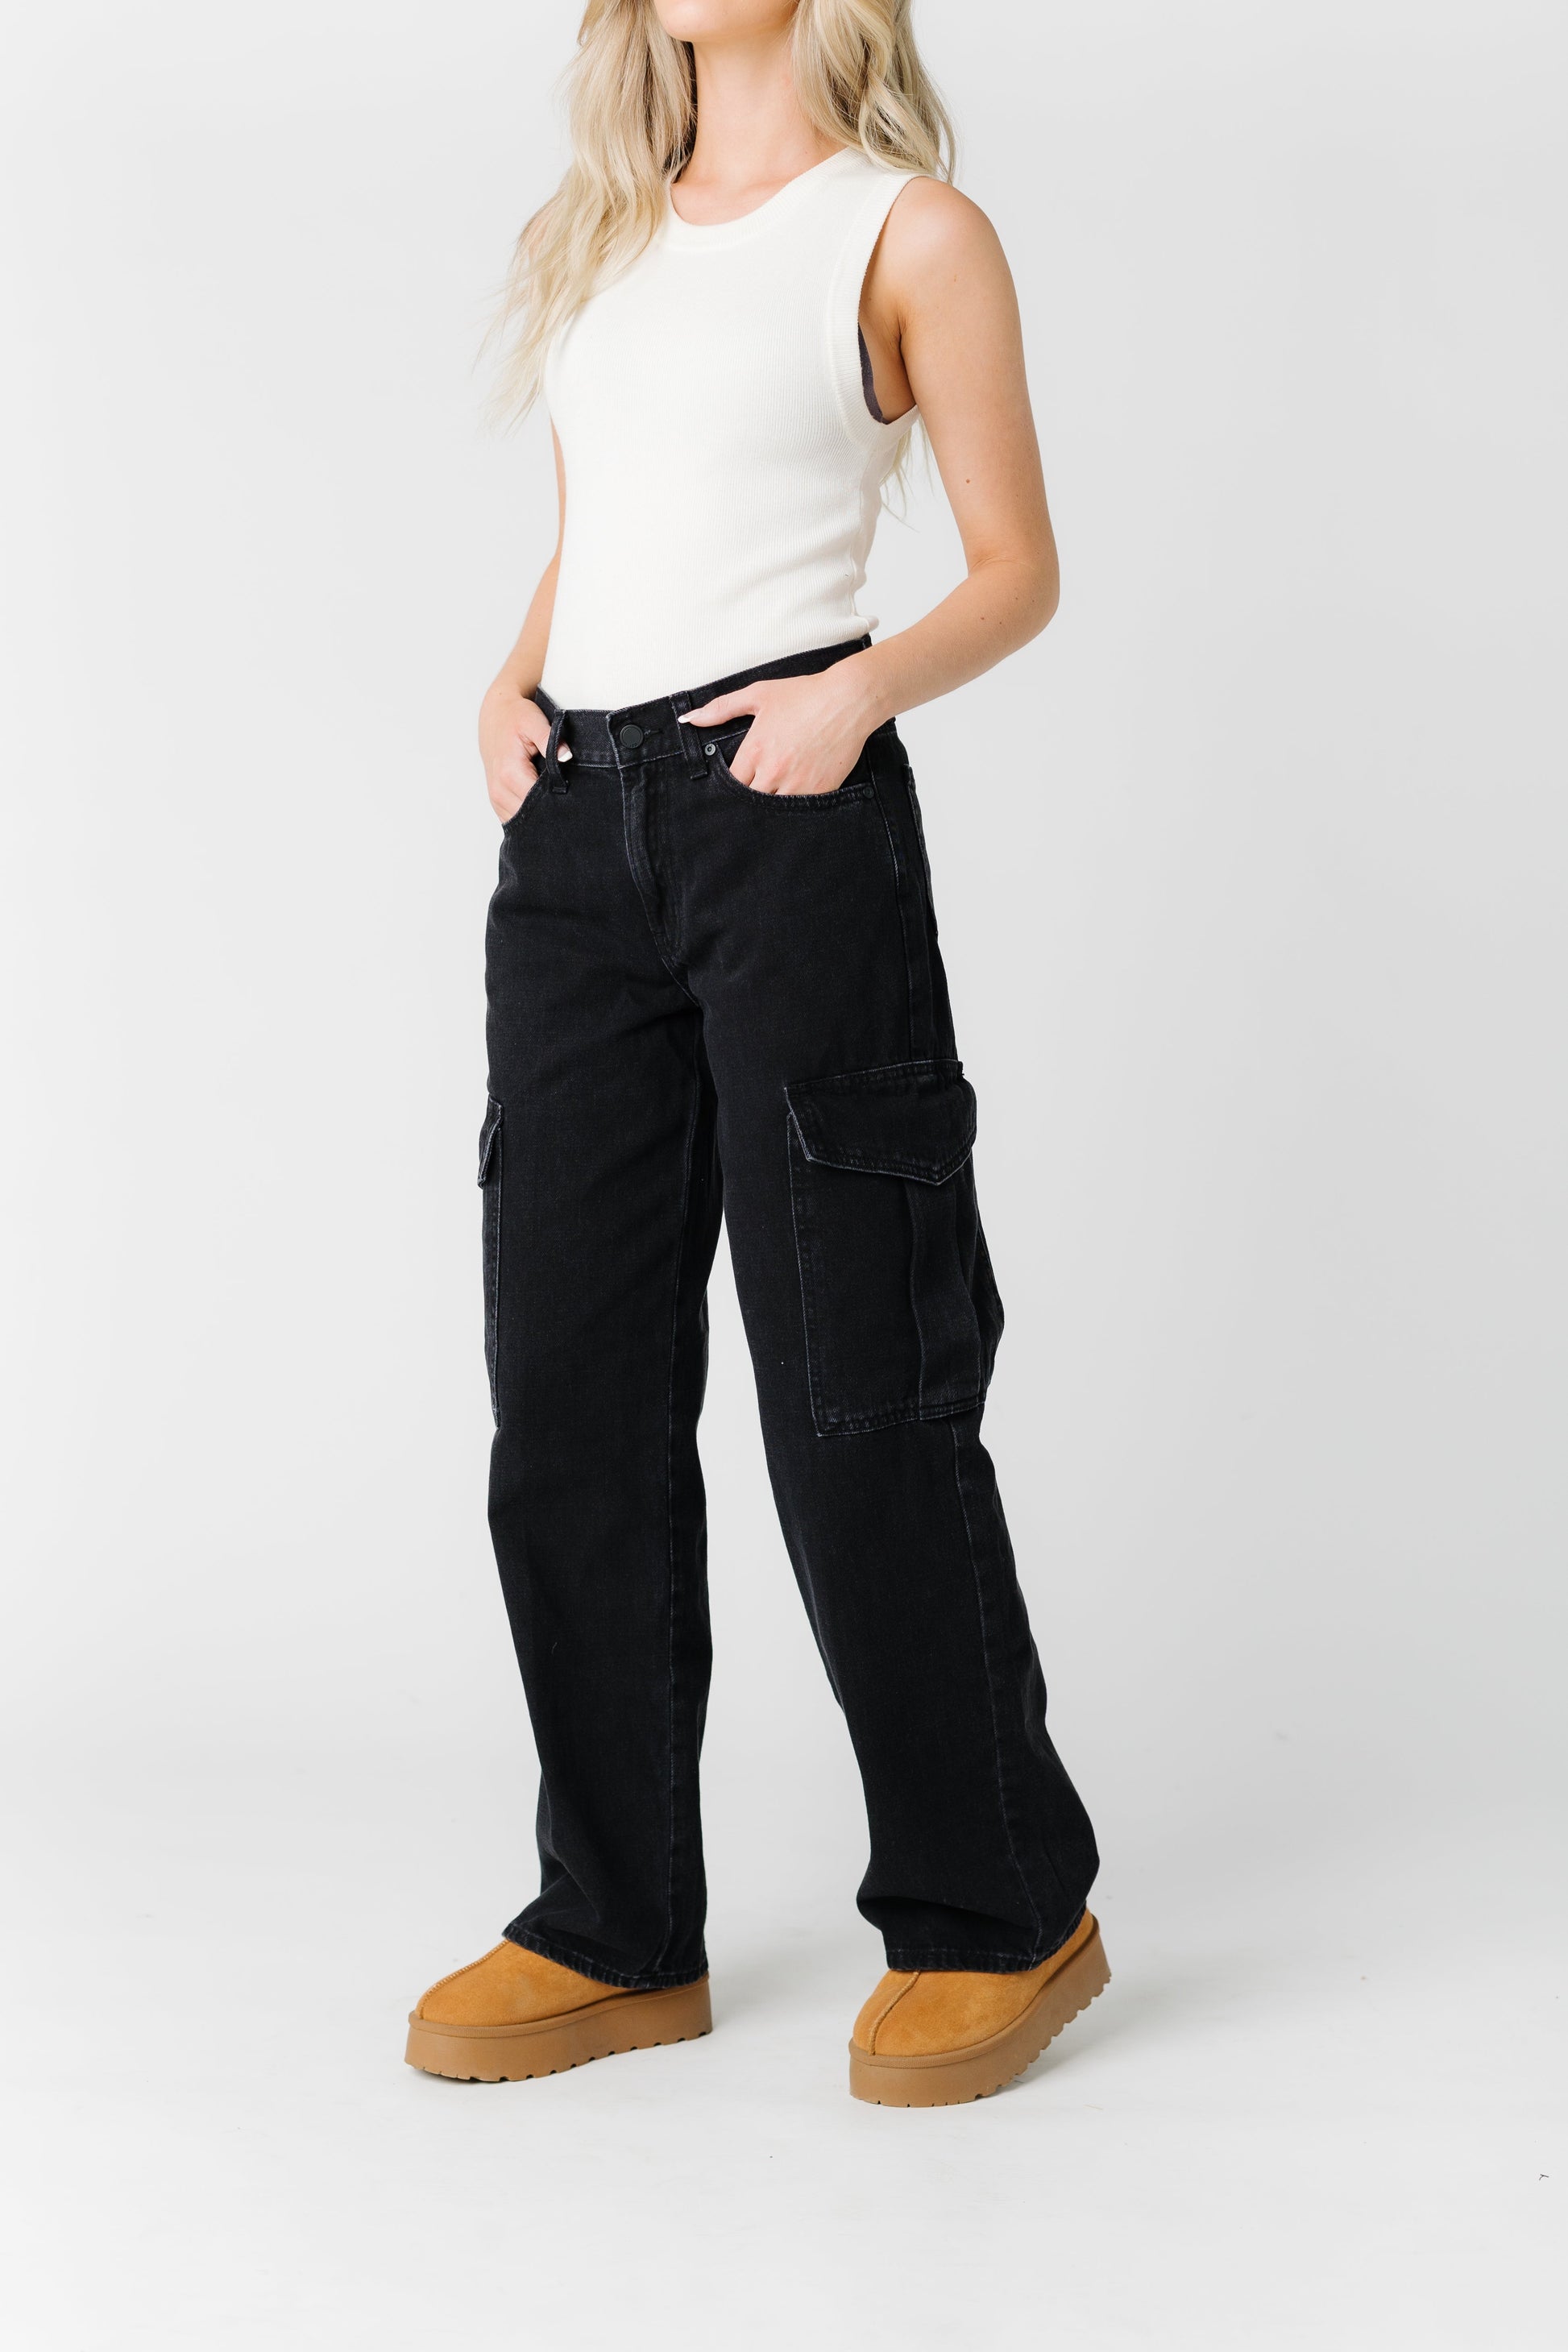 Day to Day Cargo Jeans WOMEN'S DENIM Just Panmaco Inc. 